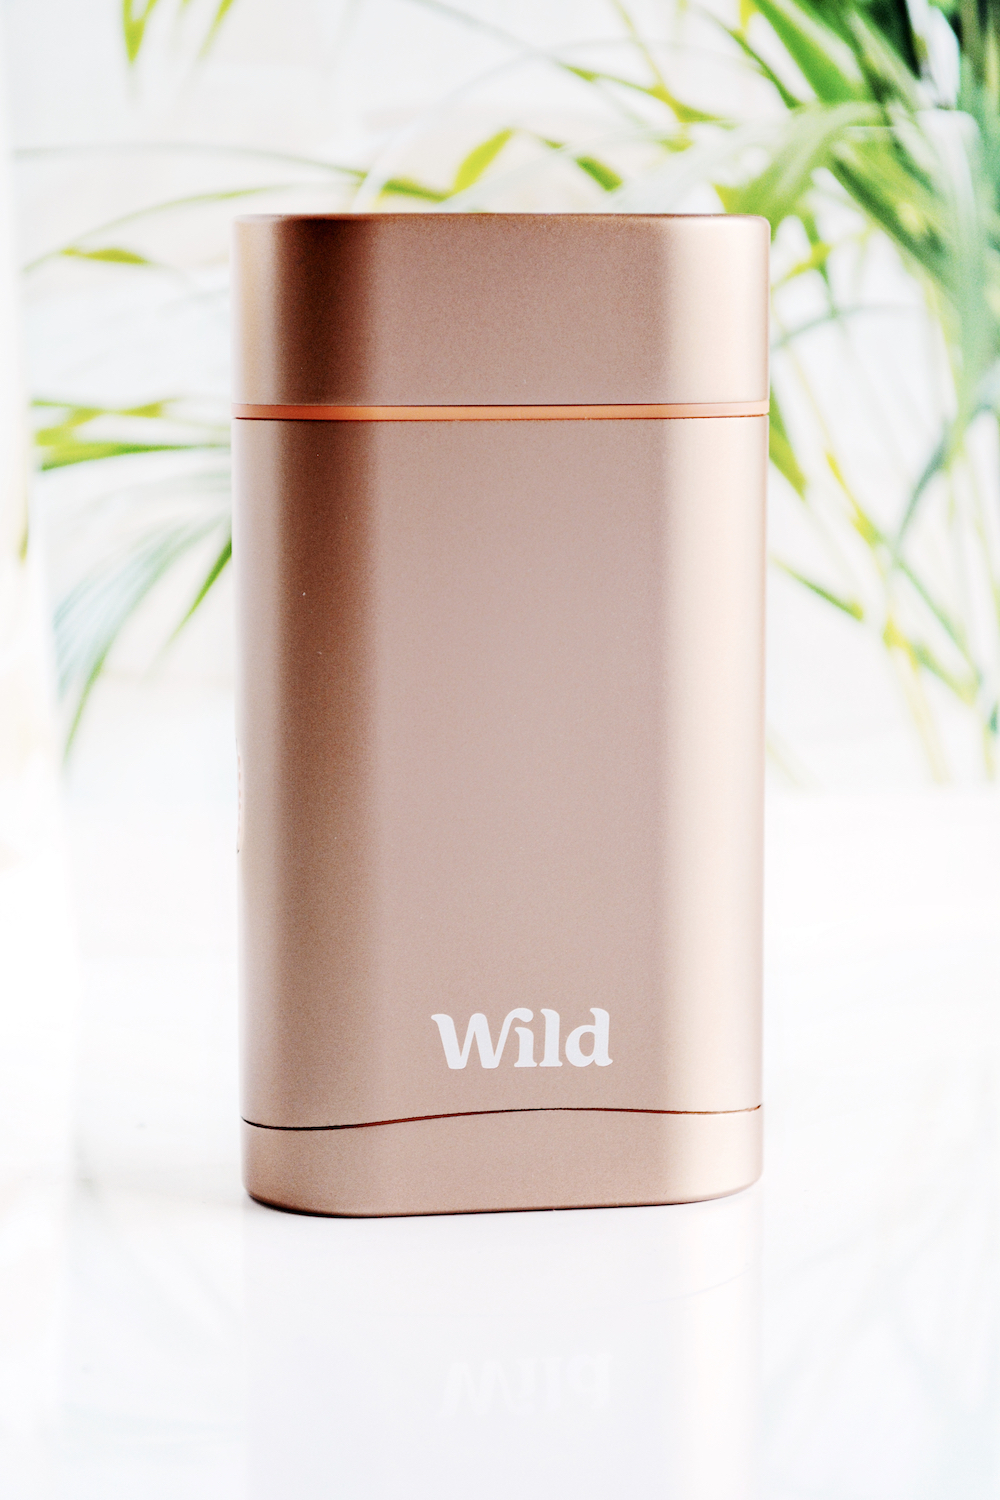 Review of Wild Natural Deodorant - a plastic-free, sustainable, refillable, natural deodorant that actually works!